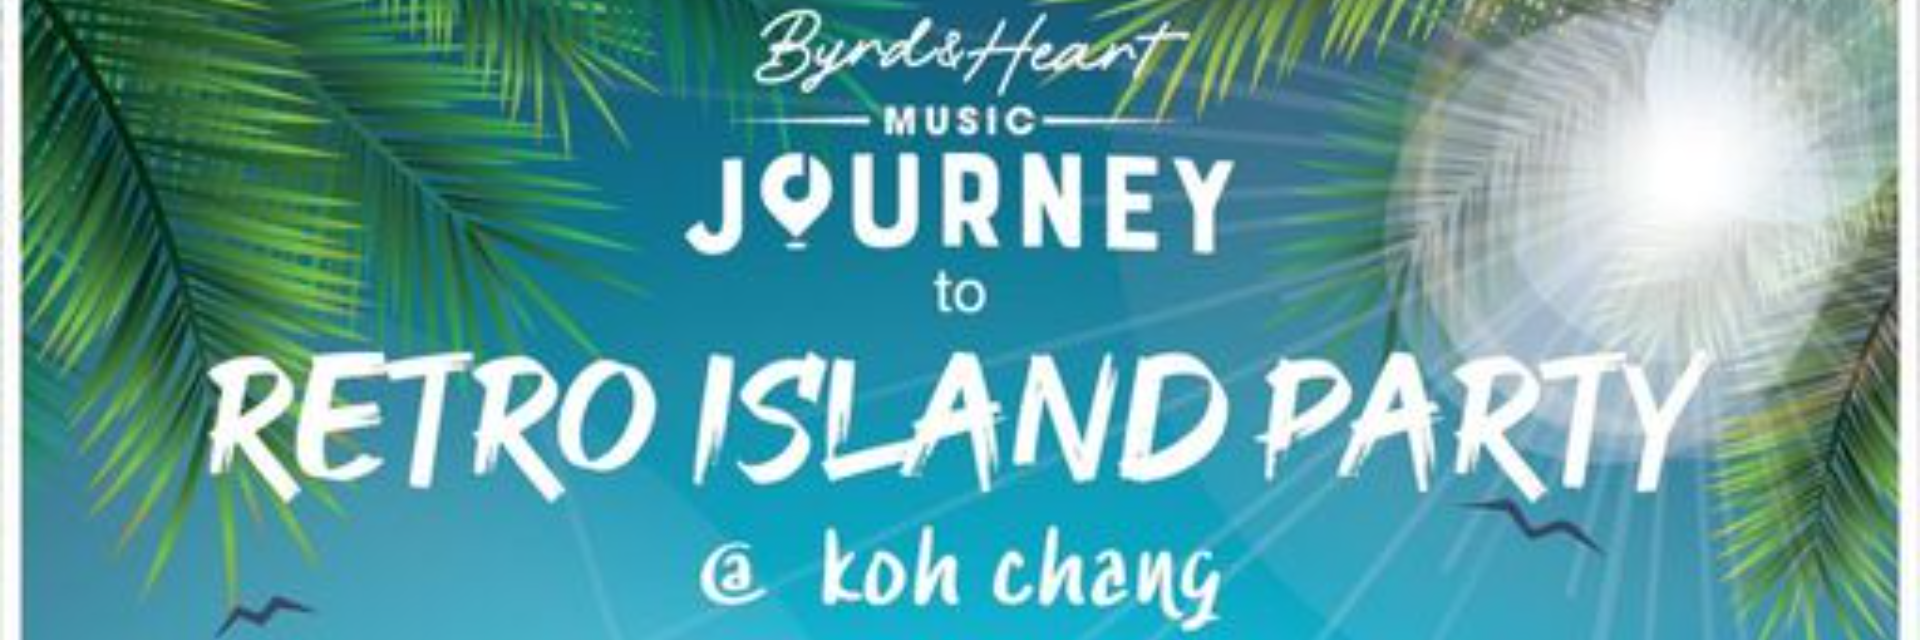 Byrd & Heart Music Jourey to RETRO ISLAND PARTY @ KOH CHANG